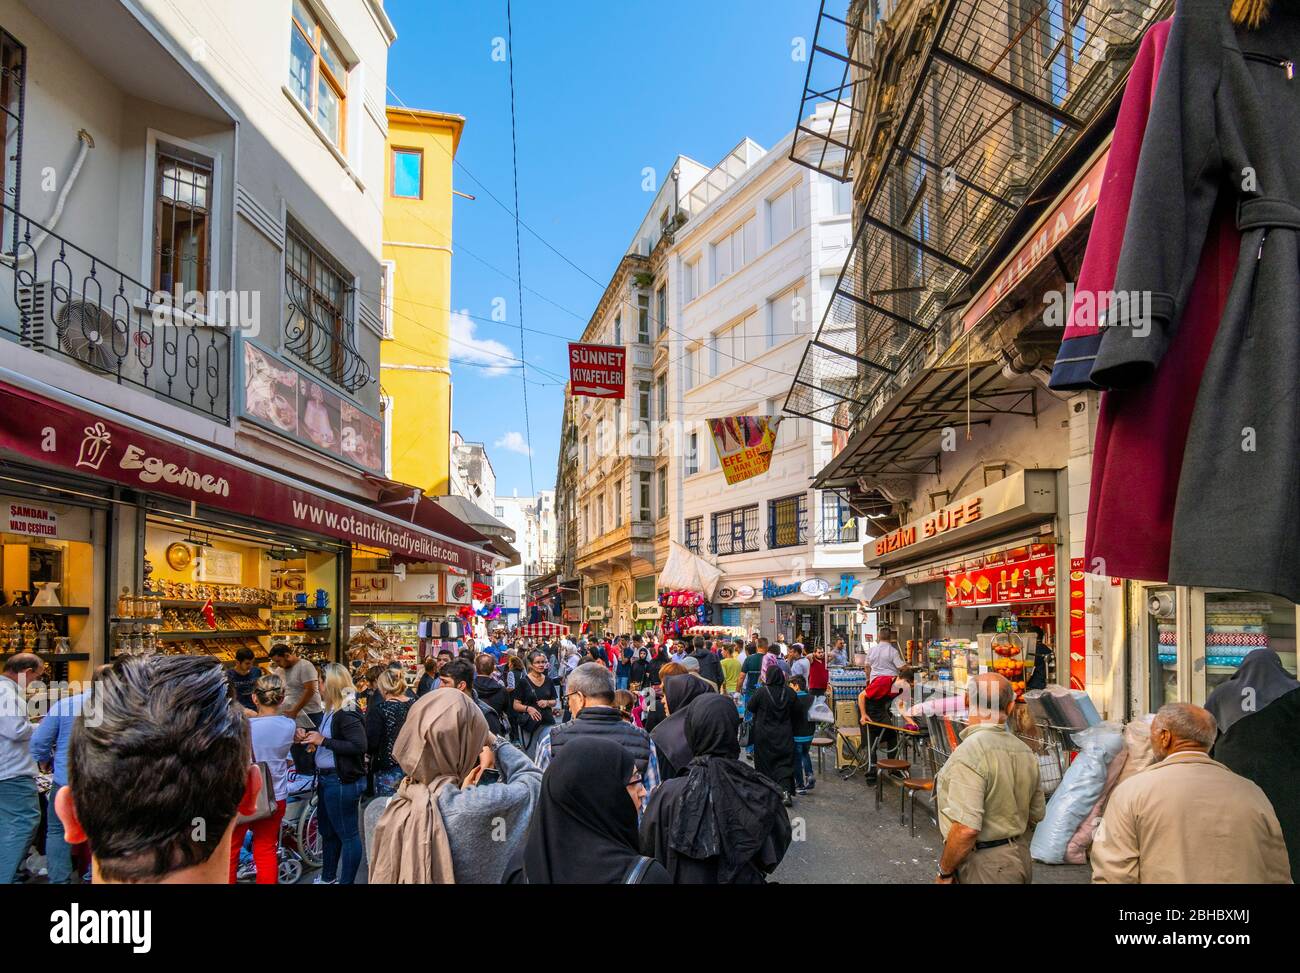 Local Turks pack the streets lined with shops and cafes near the Eminonu Bazaar and market in the Sultanahmet district of Istanbul. Stock Photo